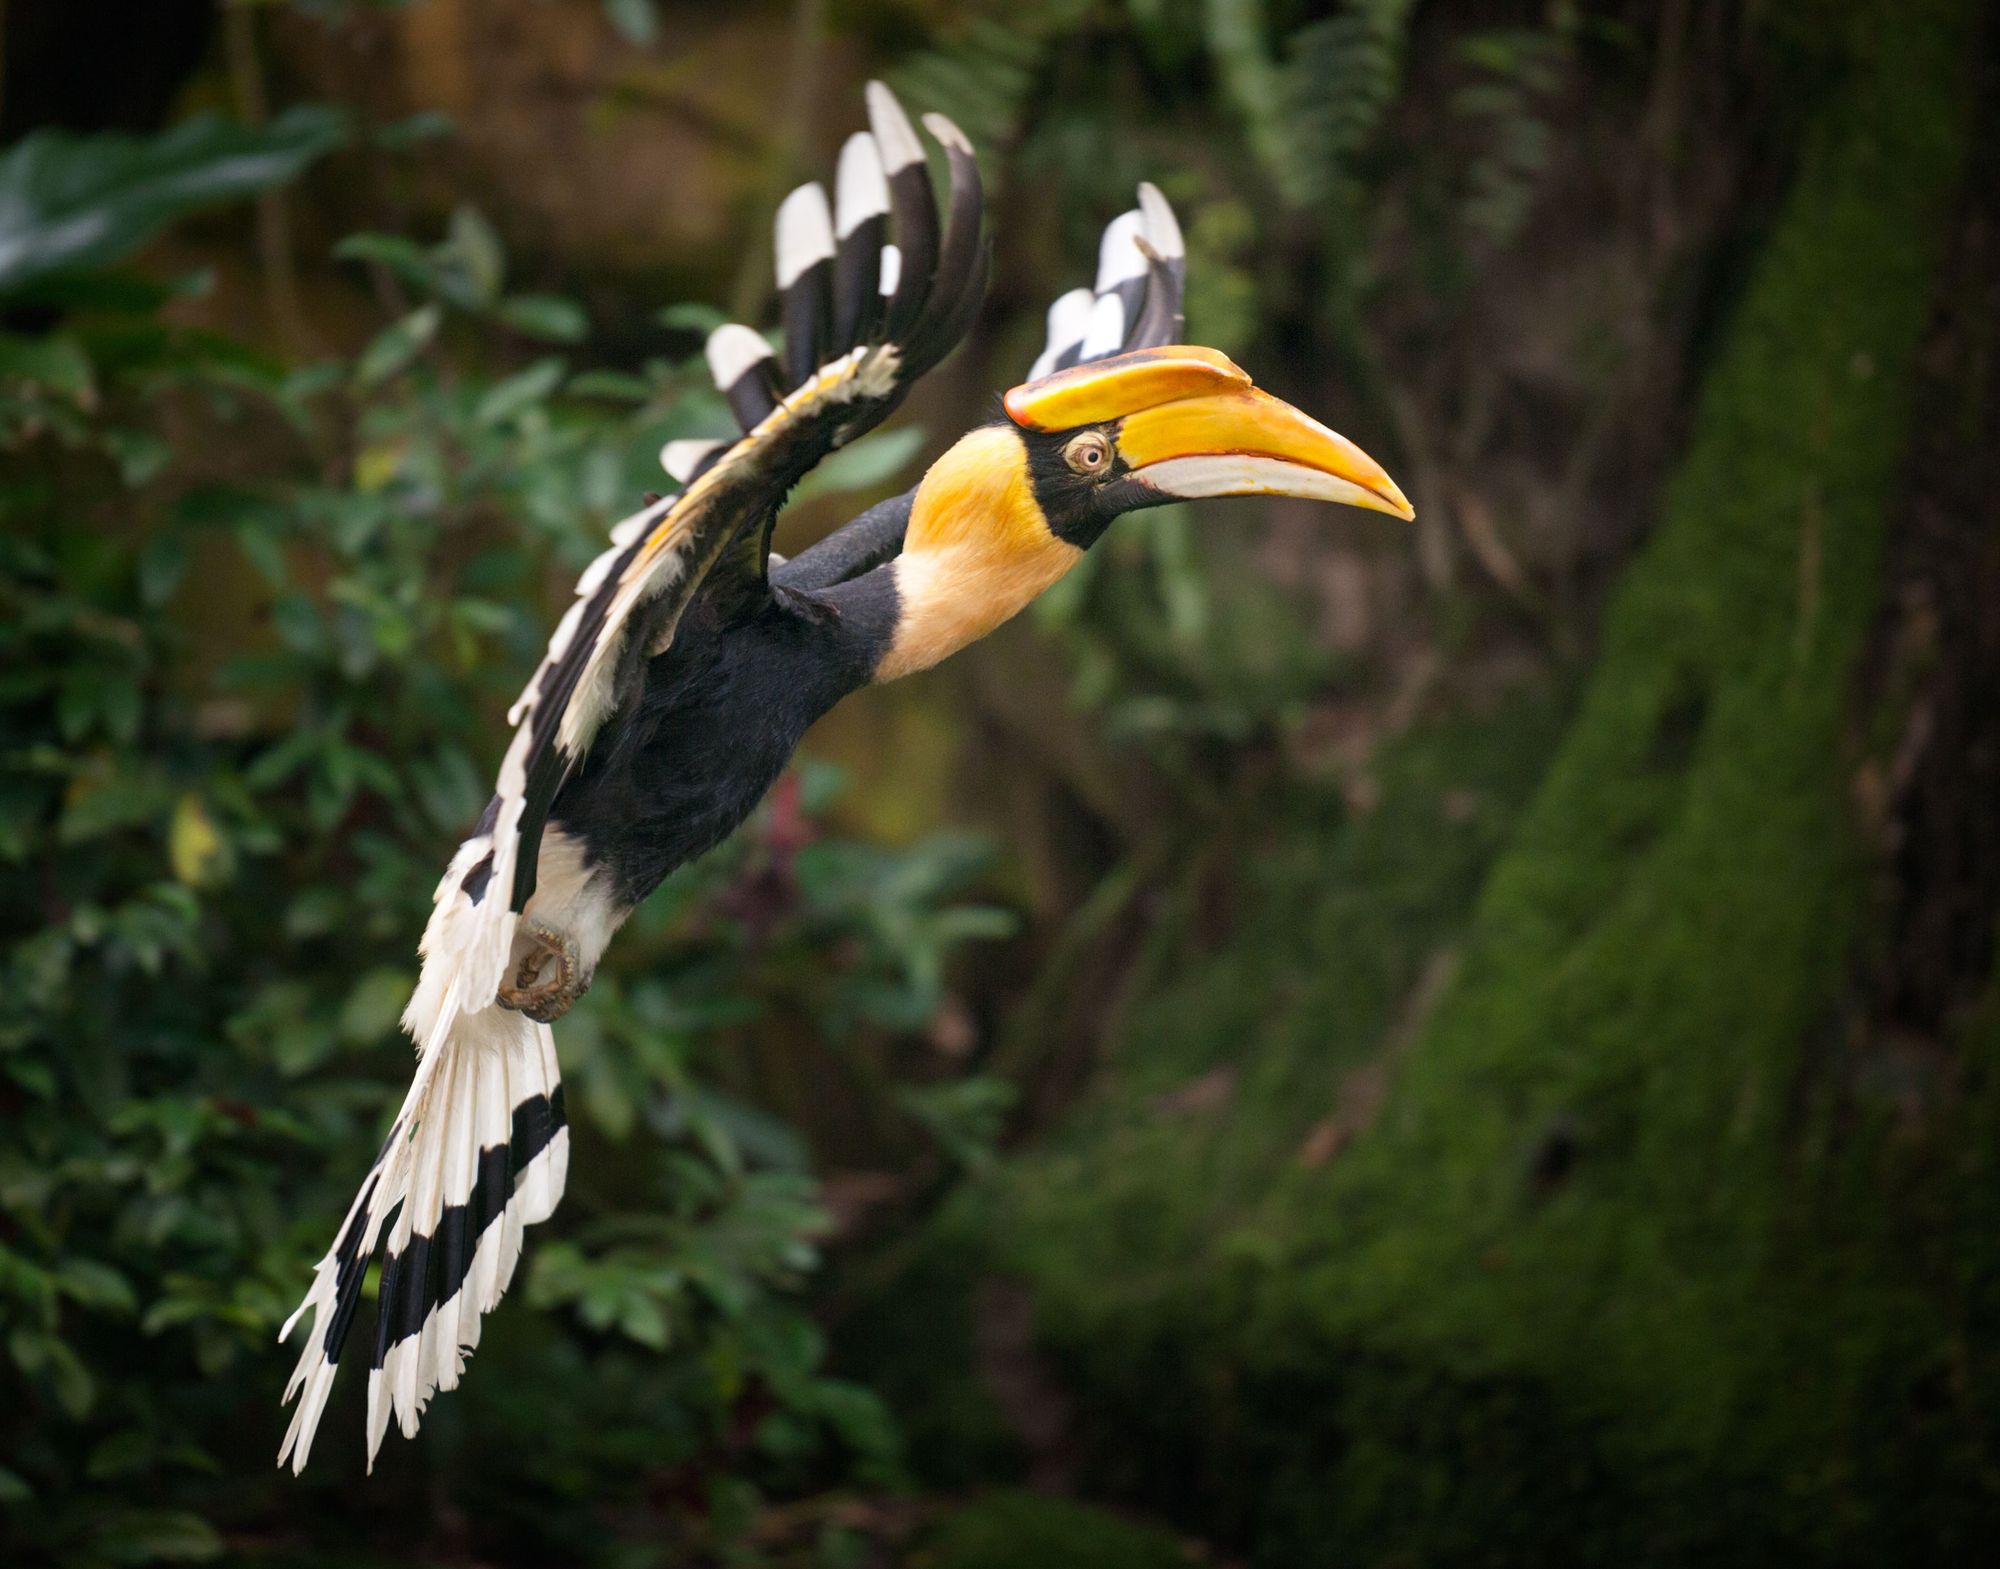 A distinctive hornbill bird flying through the forests of Borneo. Photo: Getty